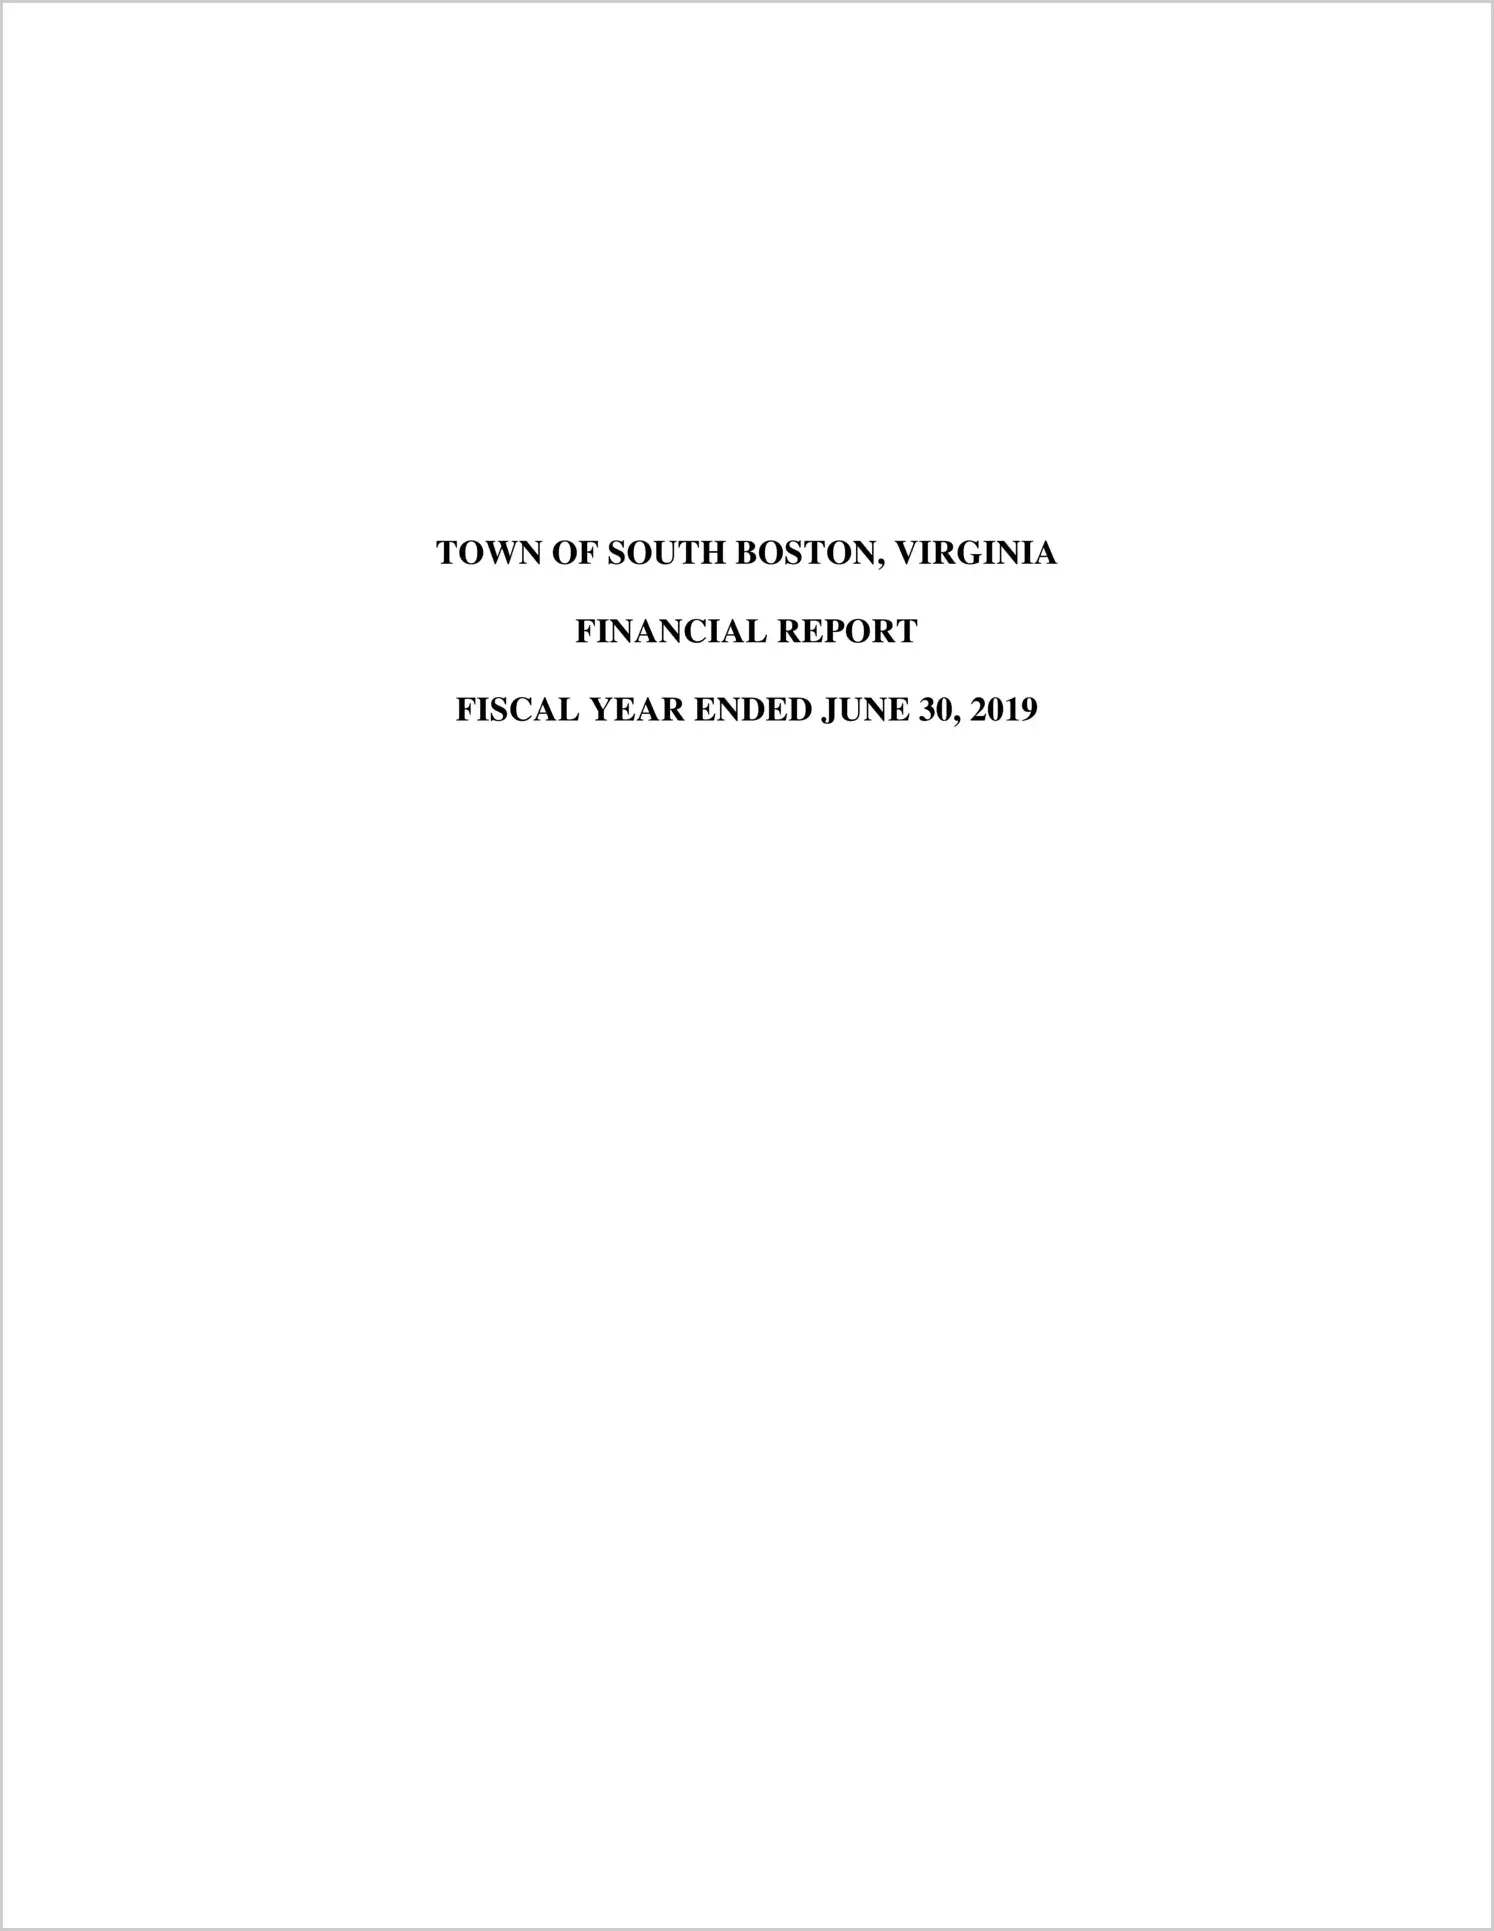 2019 Annual Financial Report for Town of South Boston